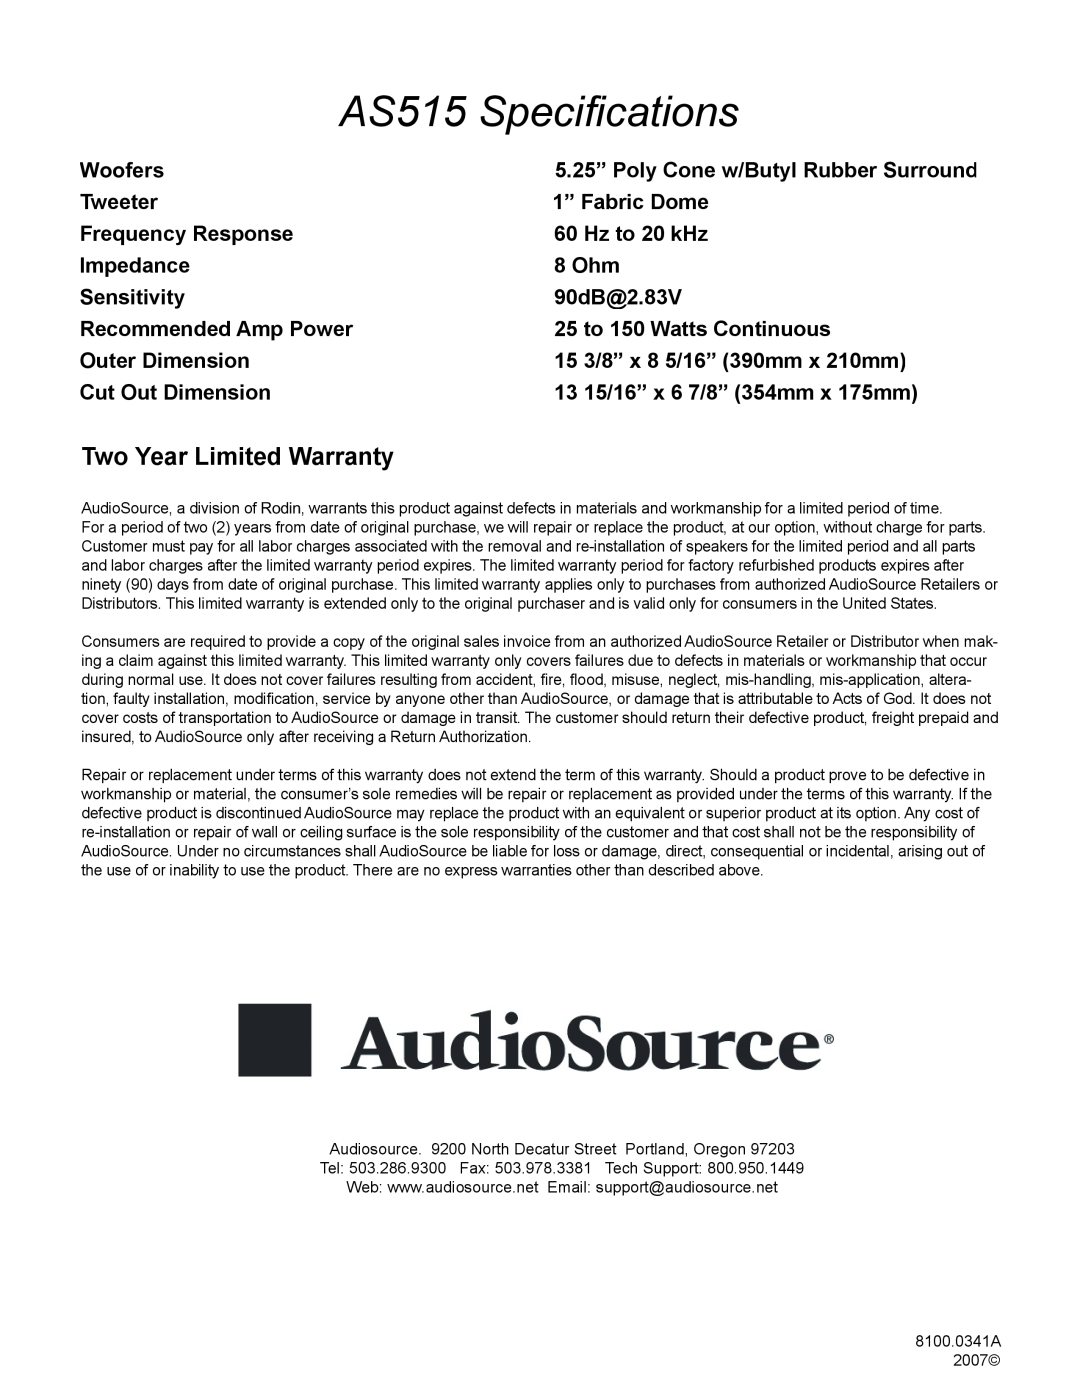 AudioSource MTM In-Wall Cinema Speaker installation manual AS515 Speciﬁ cations, Two Year Limited Warranty 